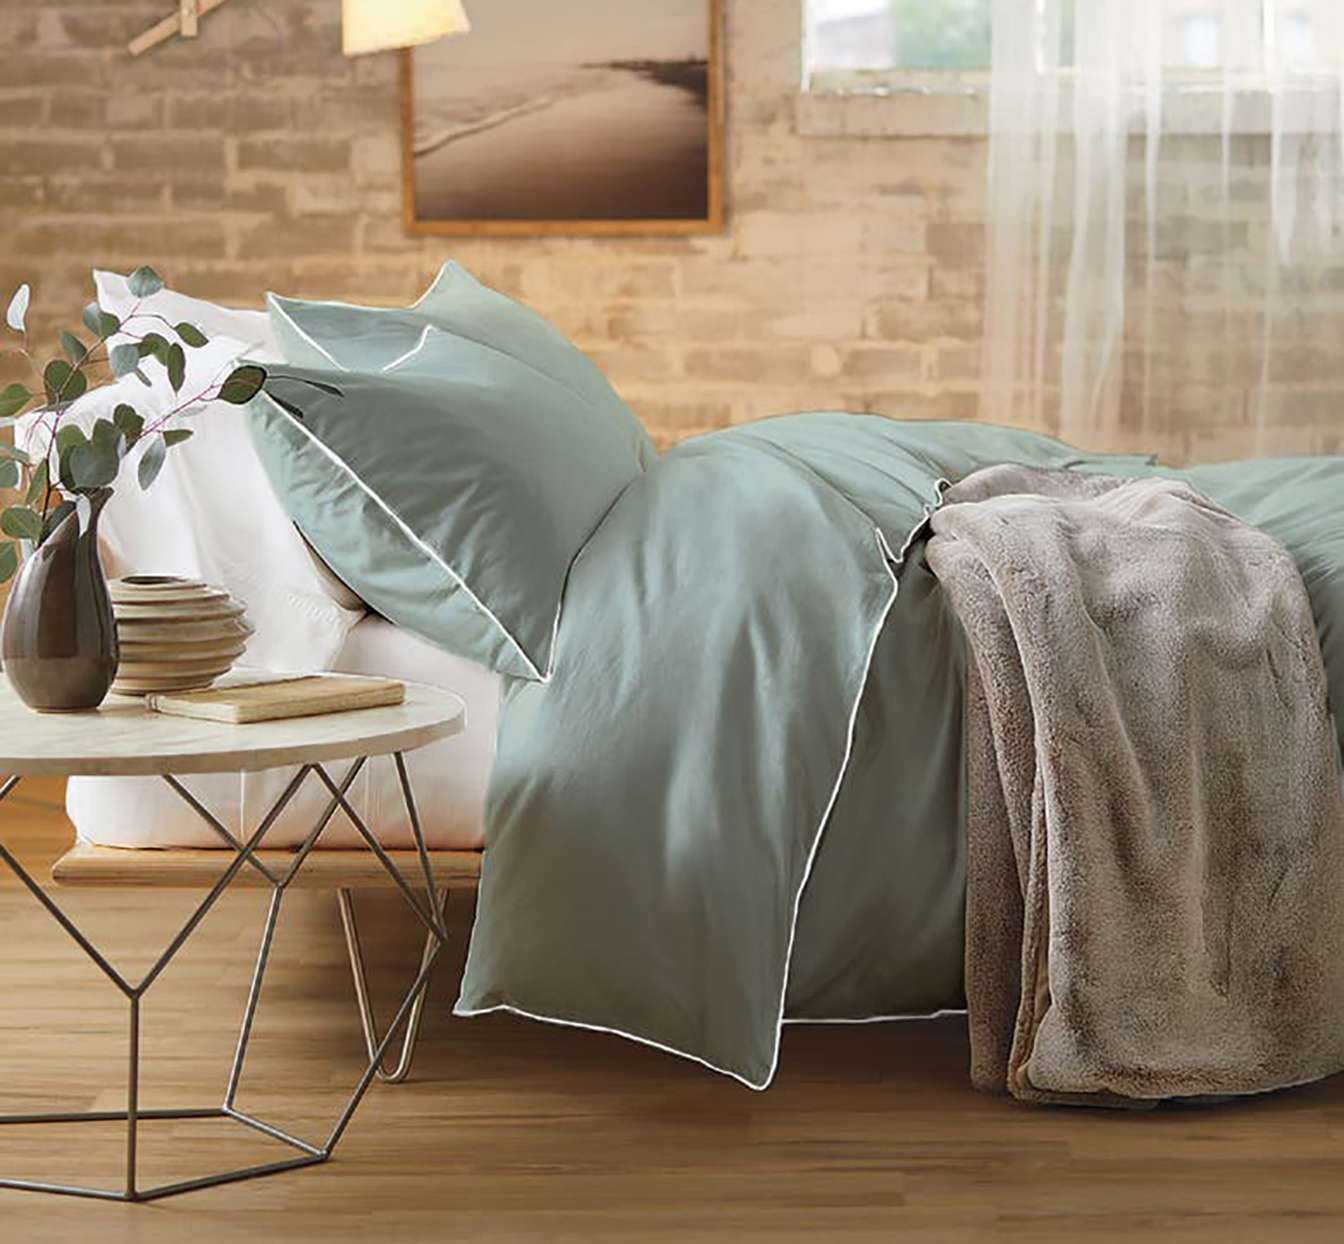 sateen bedding from nordstrom in styled bedroom